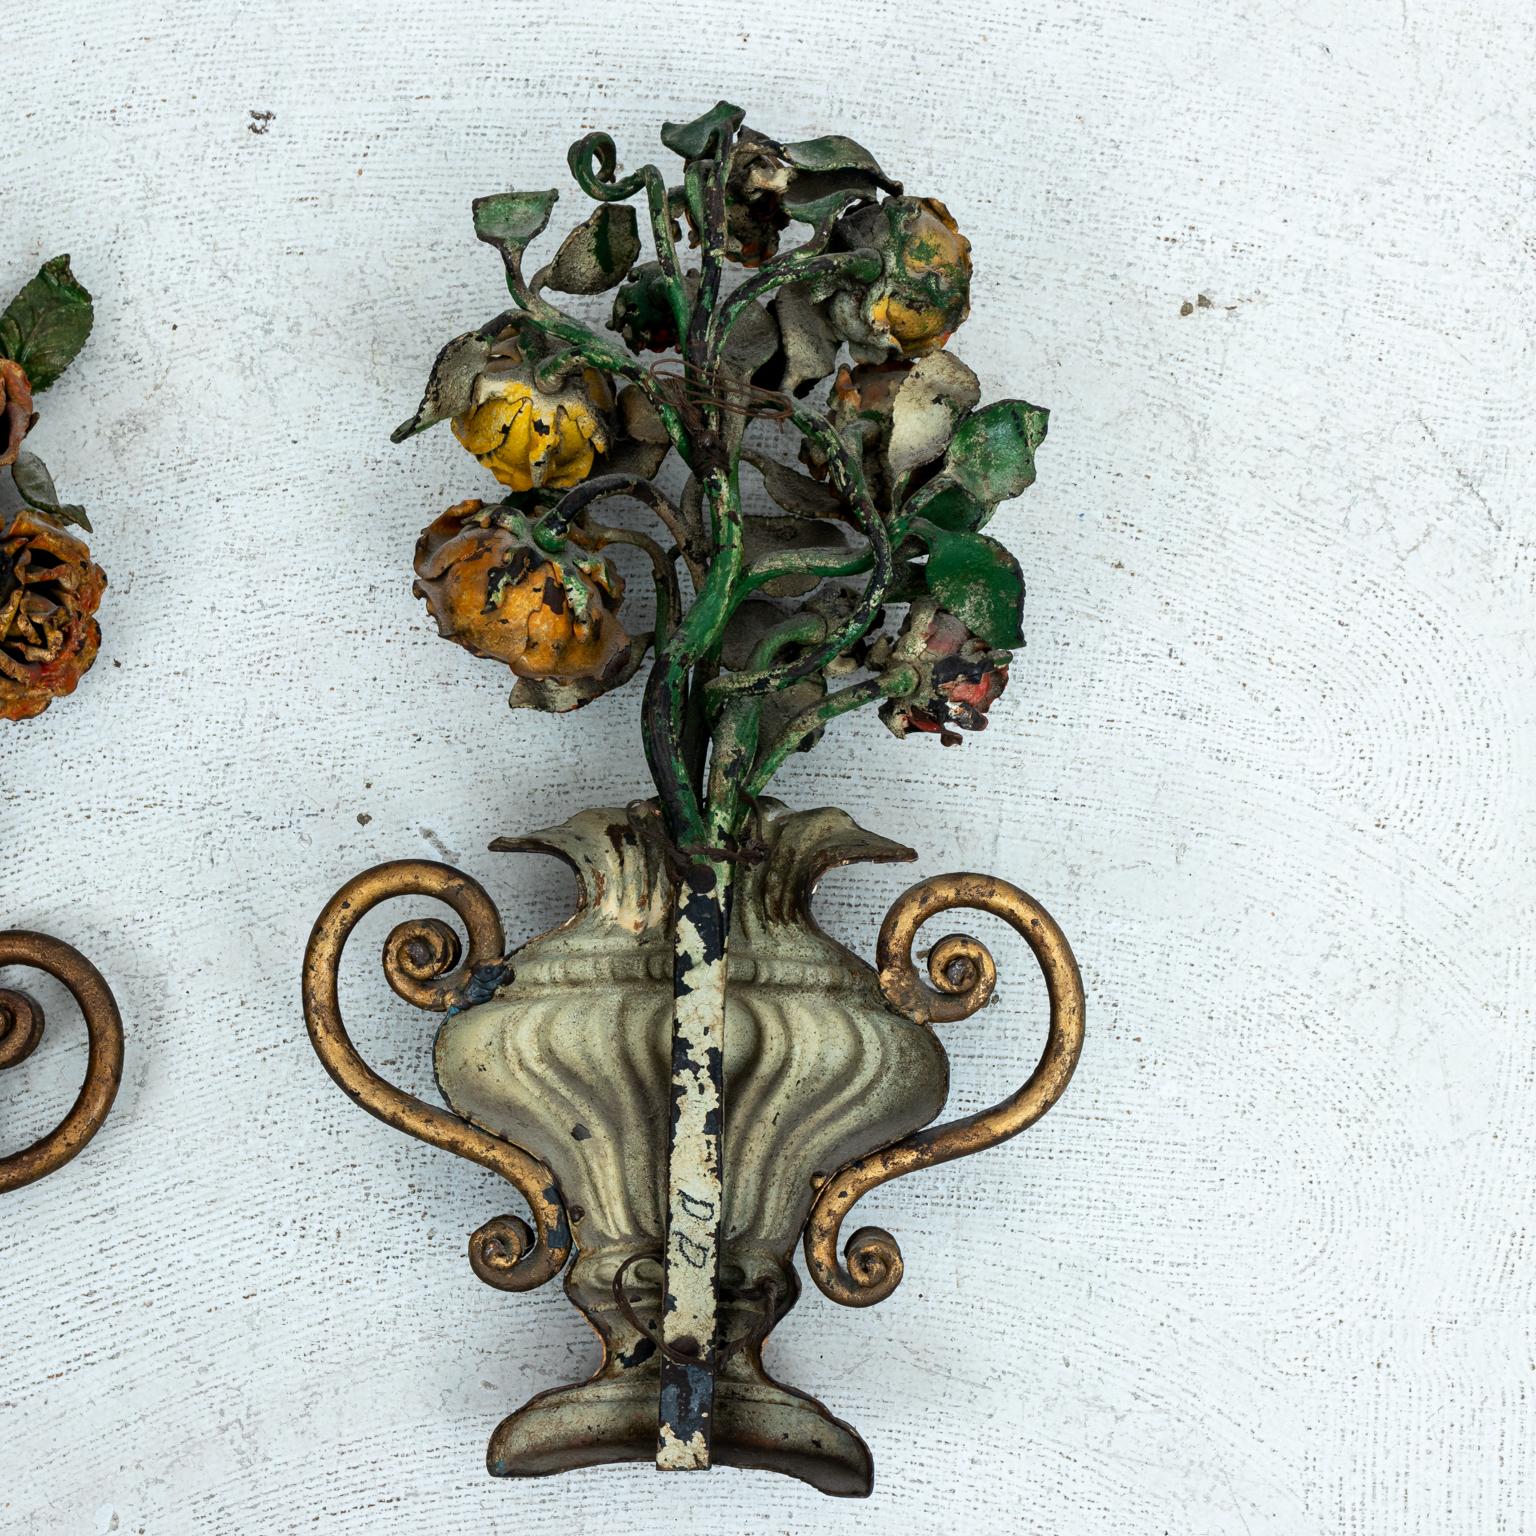 Pair of Italian painted floral urn gardeners in wrought iron, circa 19th century. The pieces also feature s-scroll shaped handles. Please note of wear consistent with age including patina, paint, and finish loss.